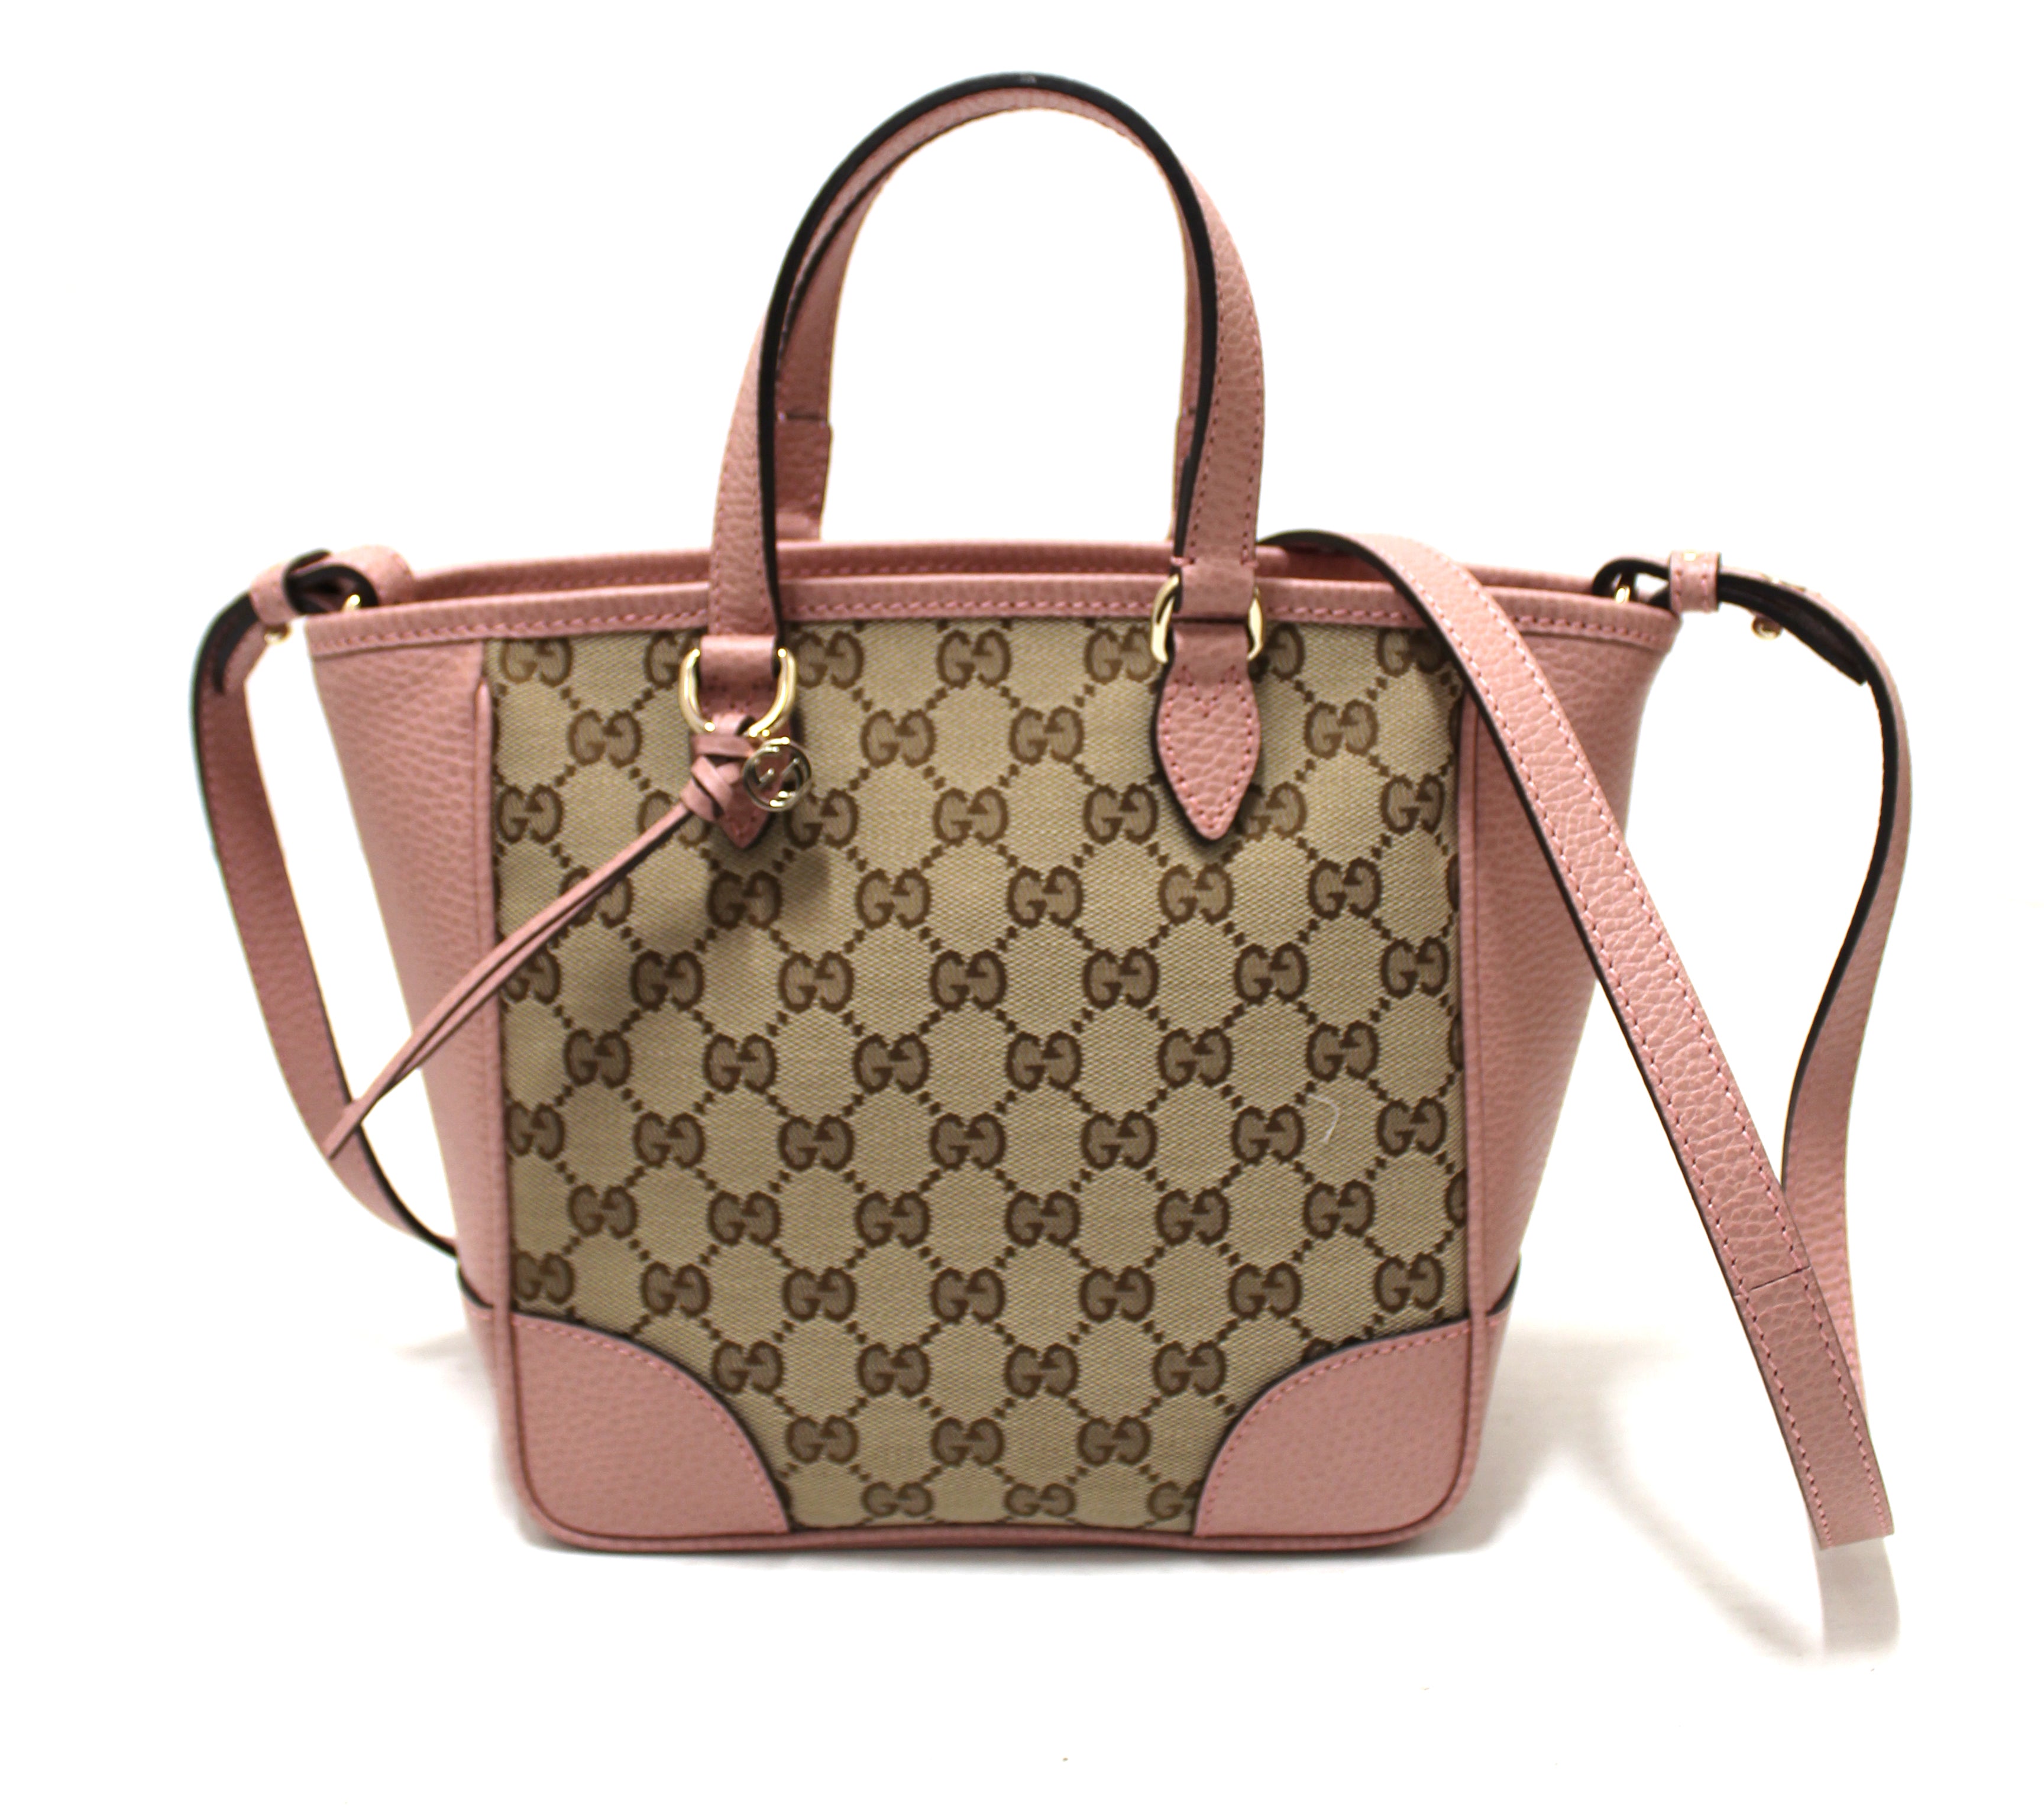 Authentic New Gucci Pink Bree Small Tote Crossbody Hand Bag 449241